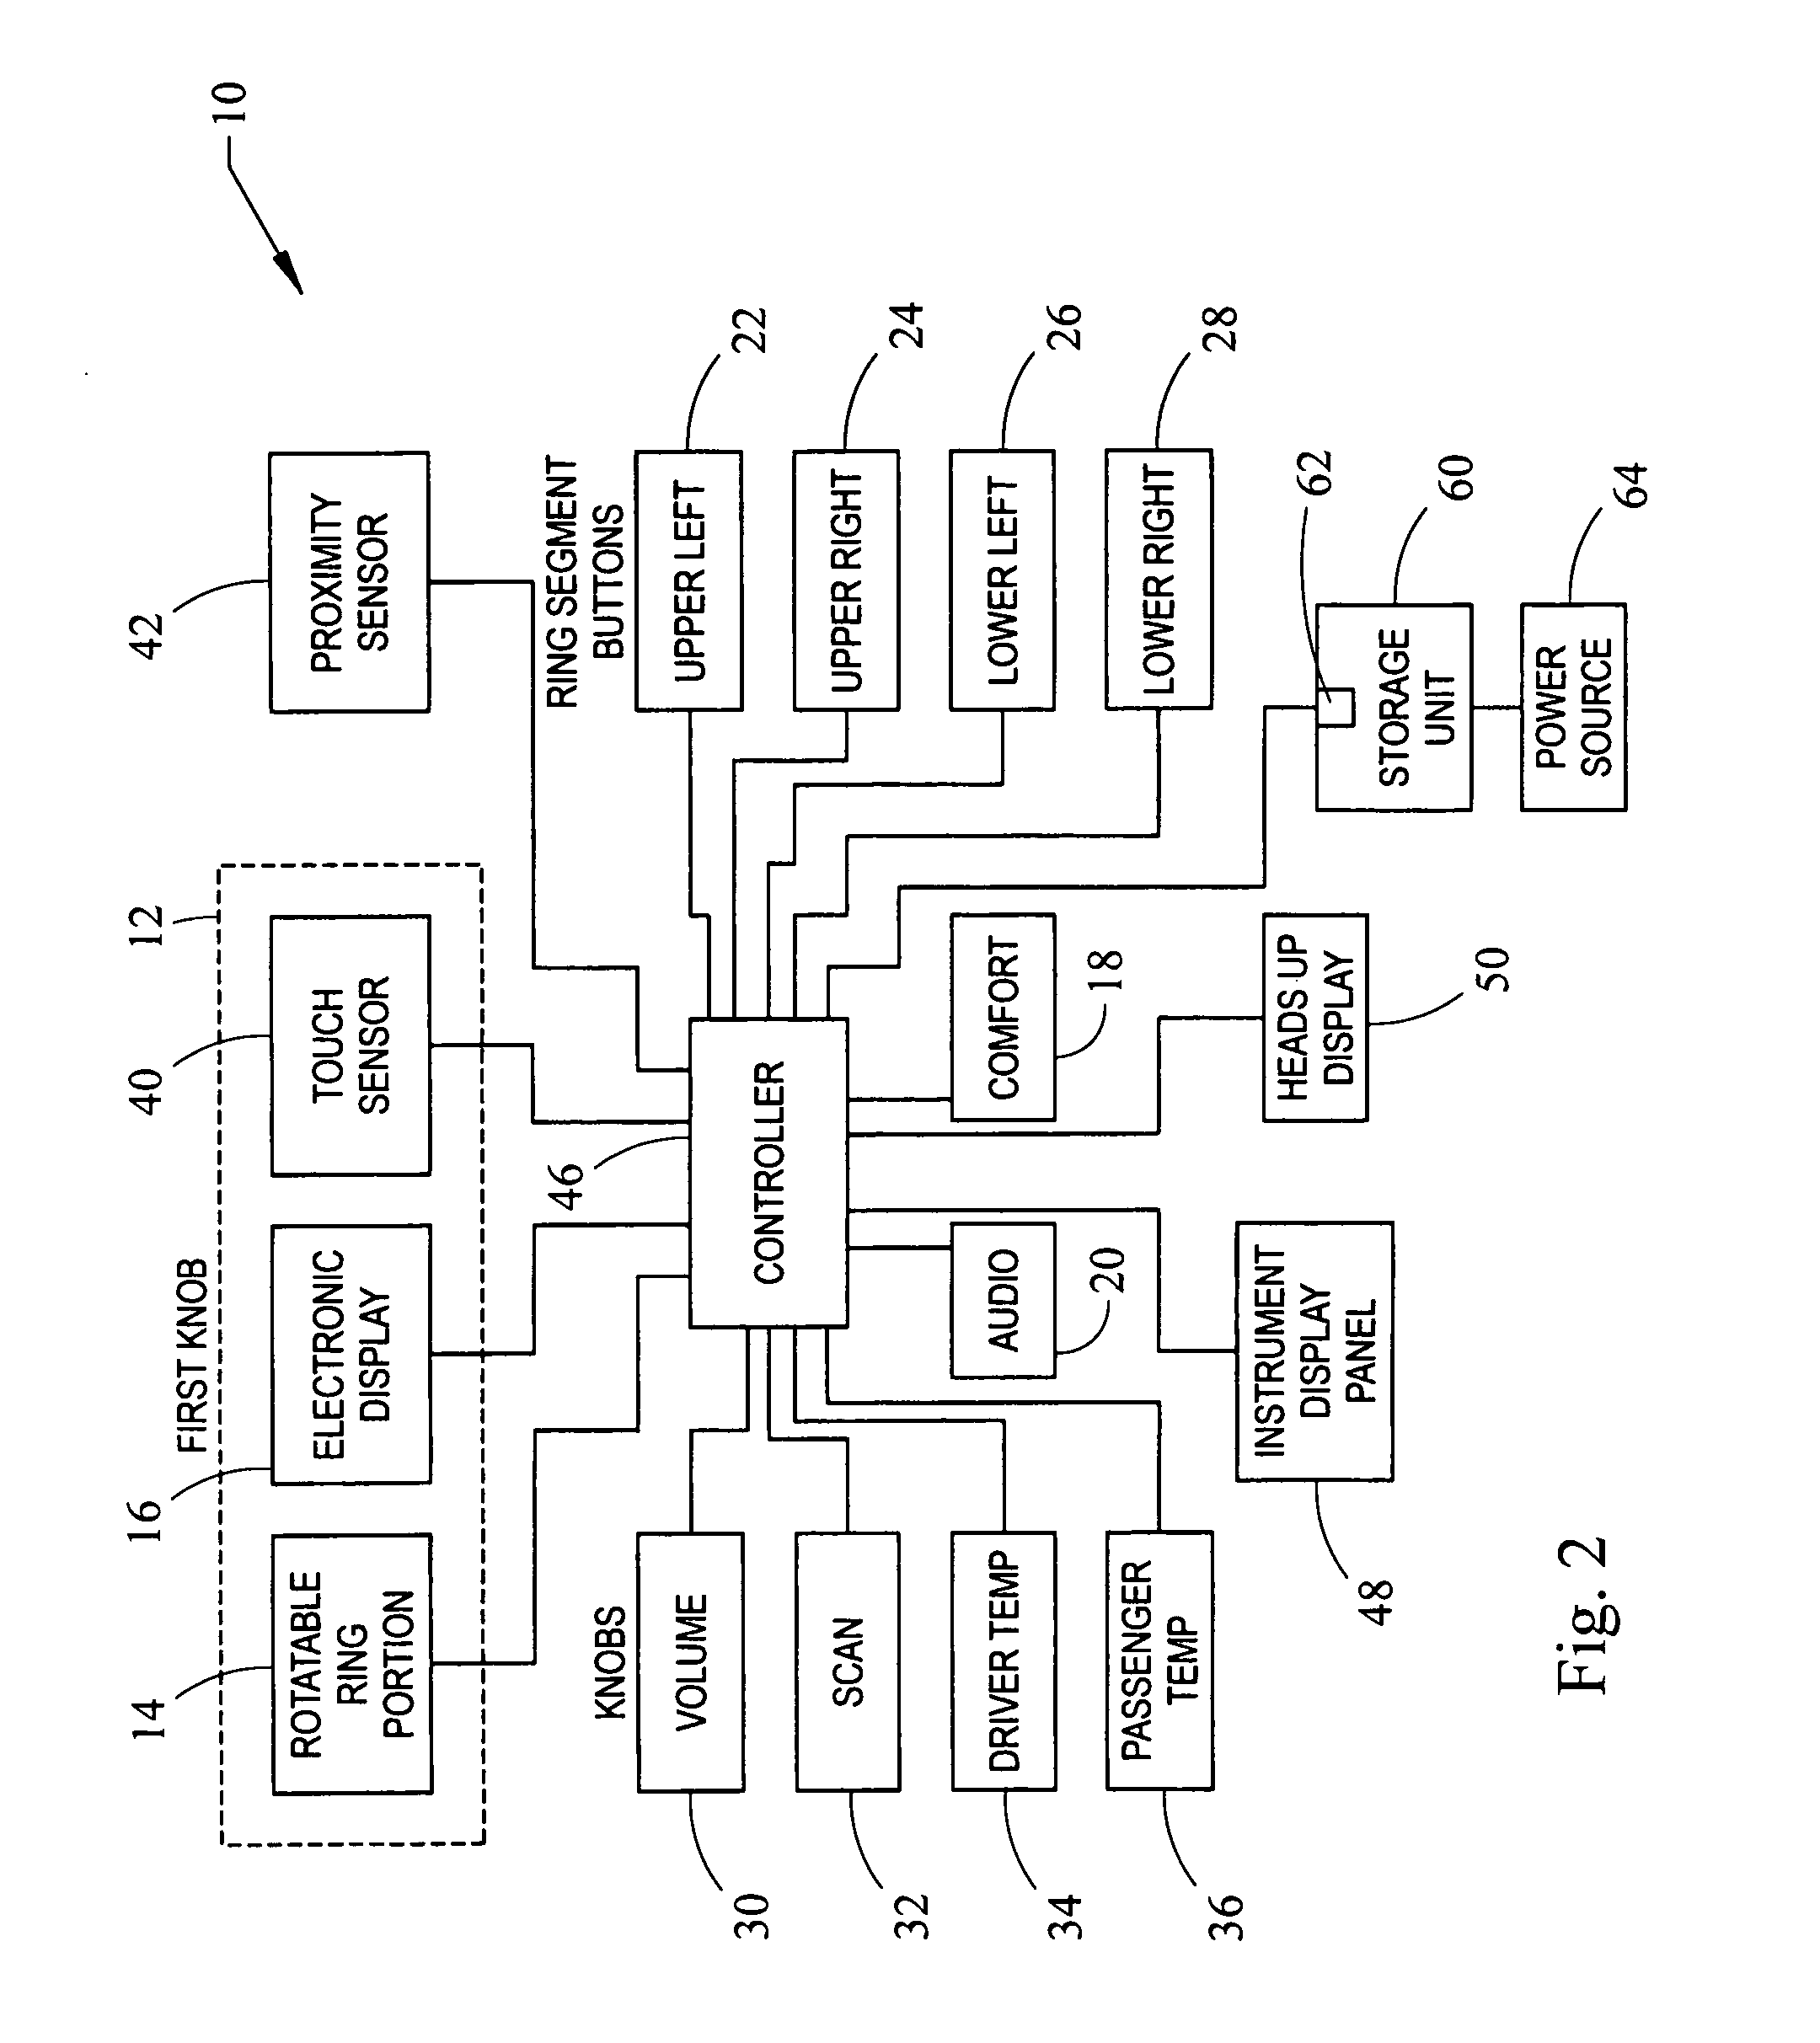 Human machine interface for a vehicle including touch sensor